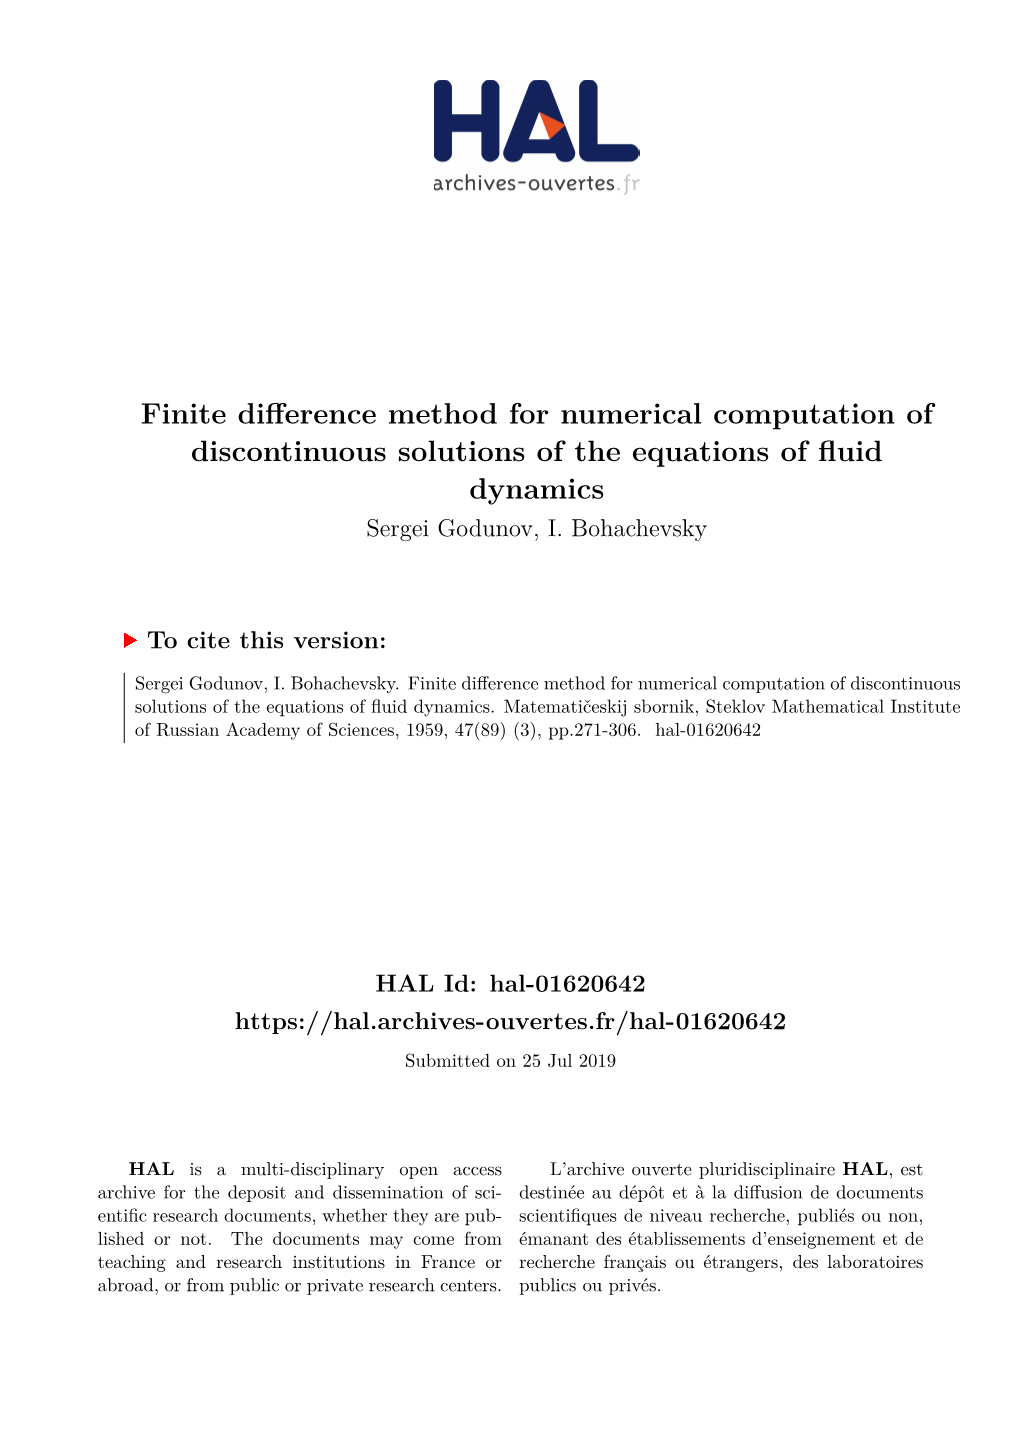 Finite Difference Method for Numerical Computation of Discontinuous Solutions of the Equations of Fluid Dynamics Sergei Godunov, I